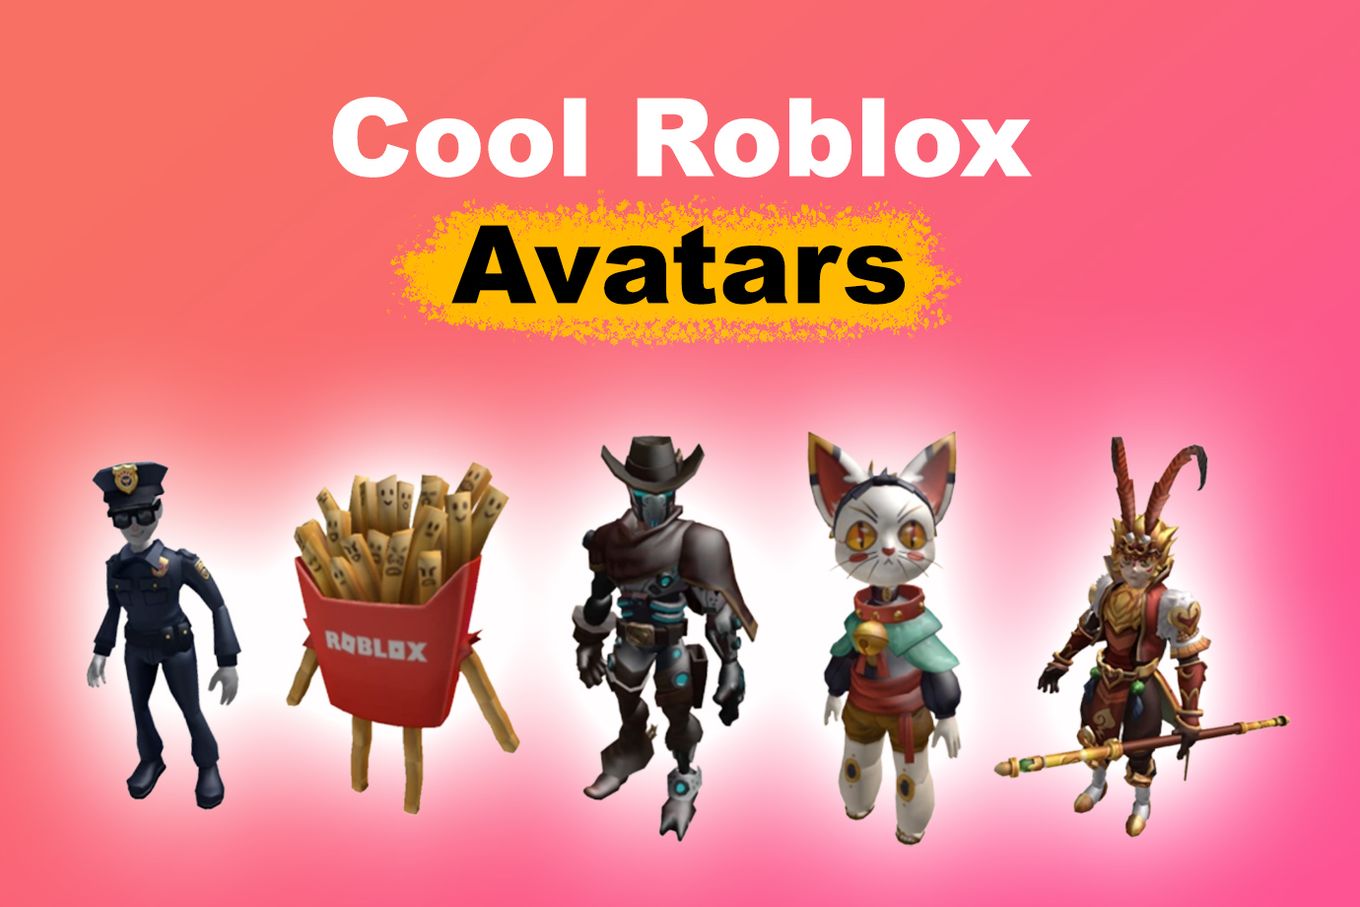 Cool free mateix avatar you can dowbload the tshirt and upload it for free  if you want  rroblox